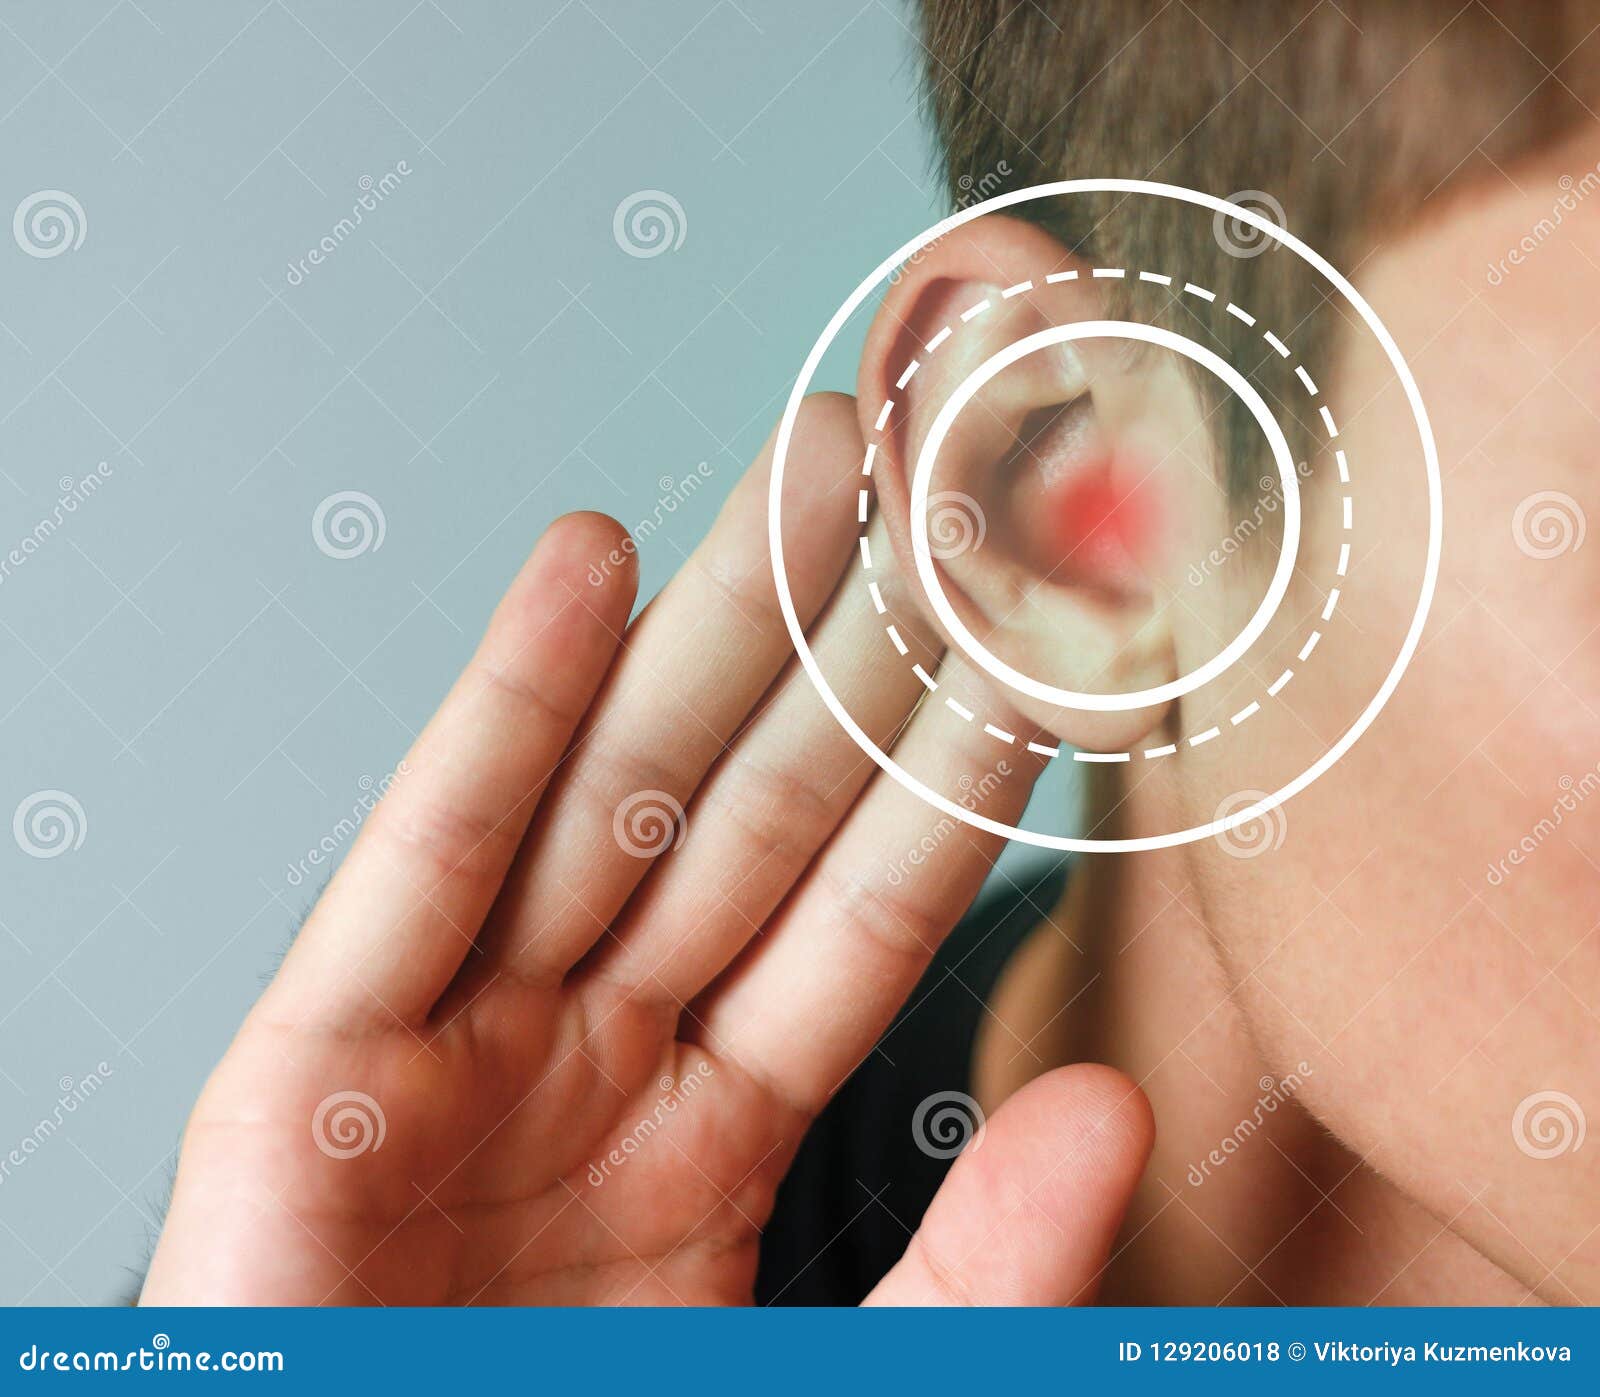 young man with symptom of hearing loss on color background